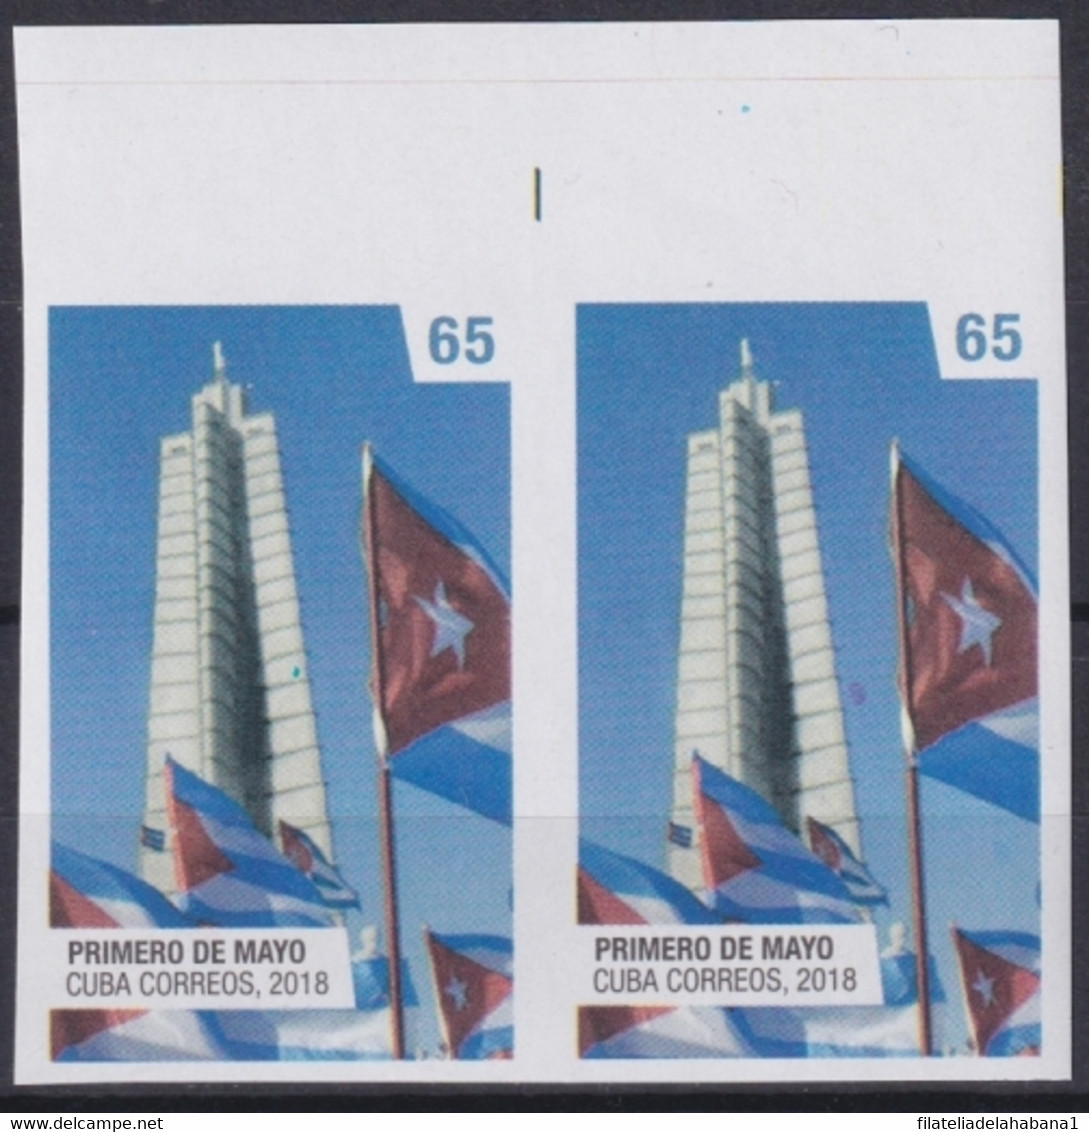 2018.221 CUBA MNH 2018 IMPERFORATED PROOF LABOR DAY PRIMERO DE MAYO FLAG. - Imperforates, Proofs & Errors